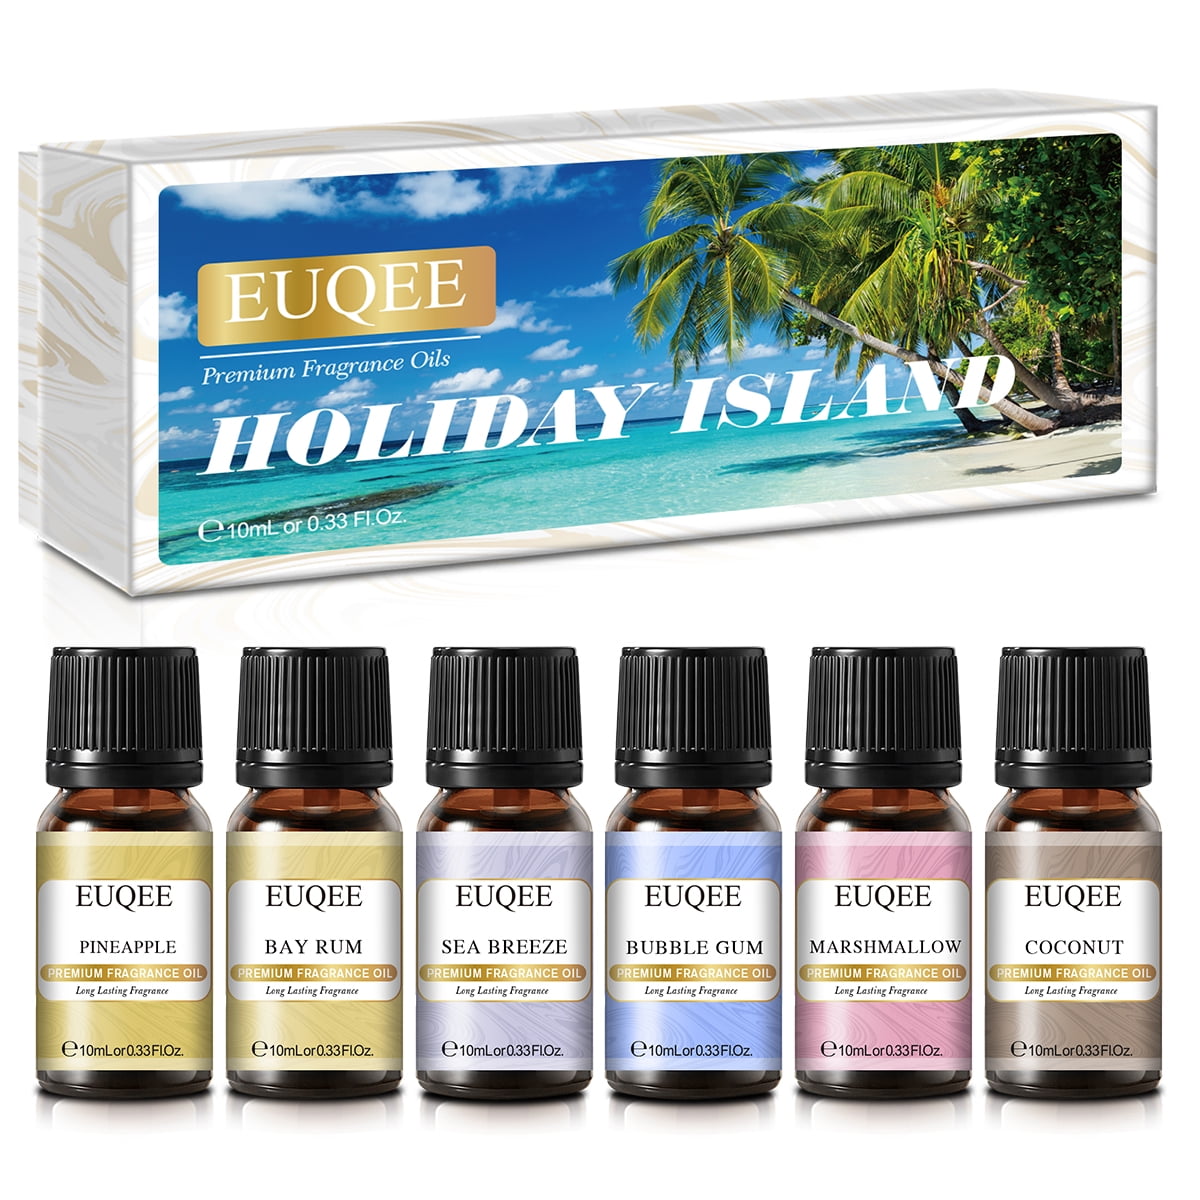 P&J Trading 10ml Premium Fragrance Oil Gift Set - Includes 6-10ml Scented  Oils for Relaxation